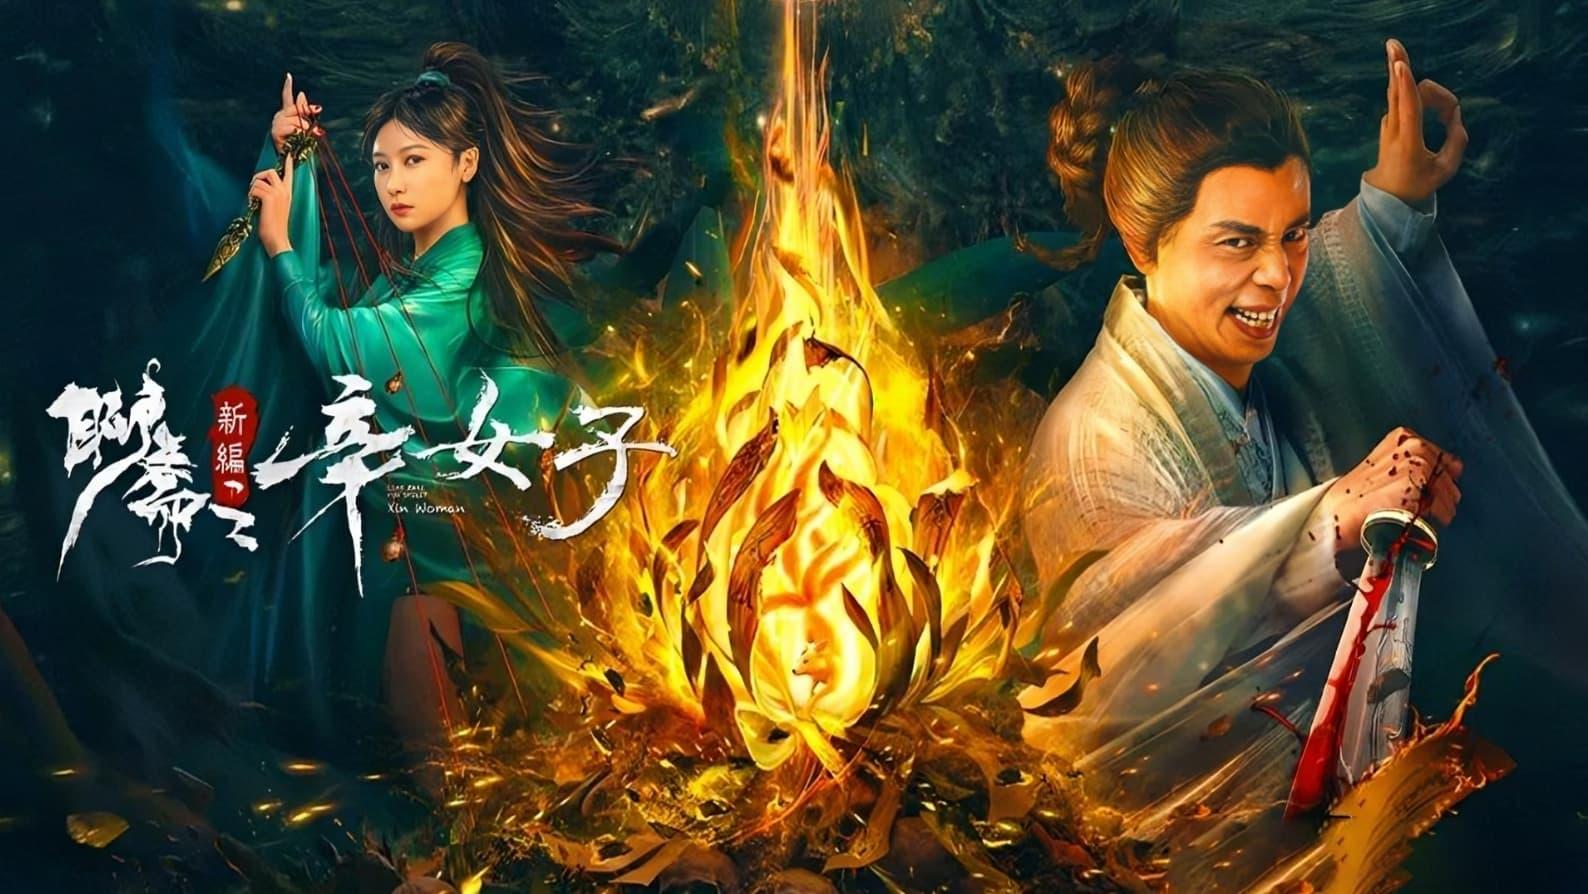 New Liao Zhai: The Story of a Sinful Woman backdrop